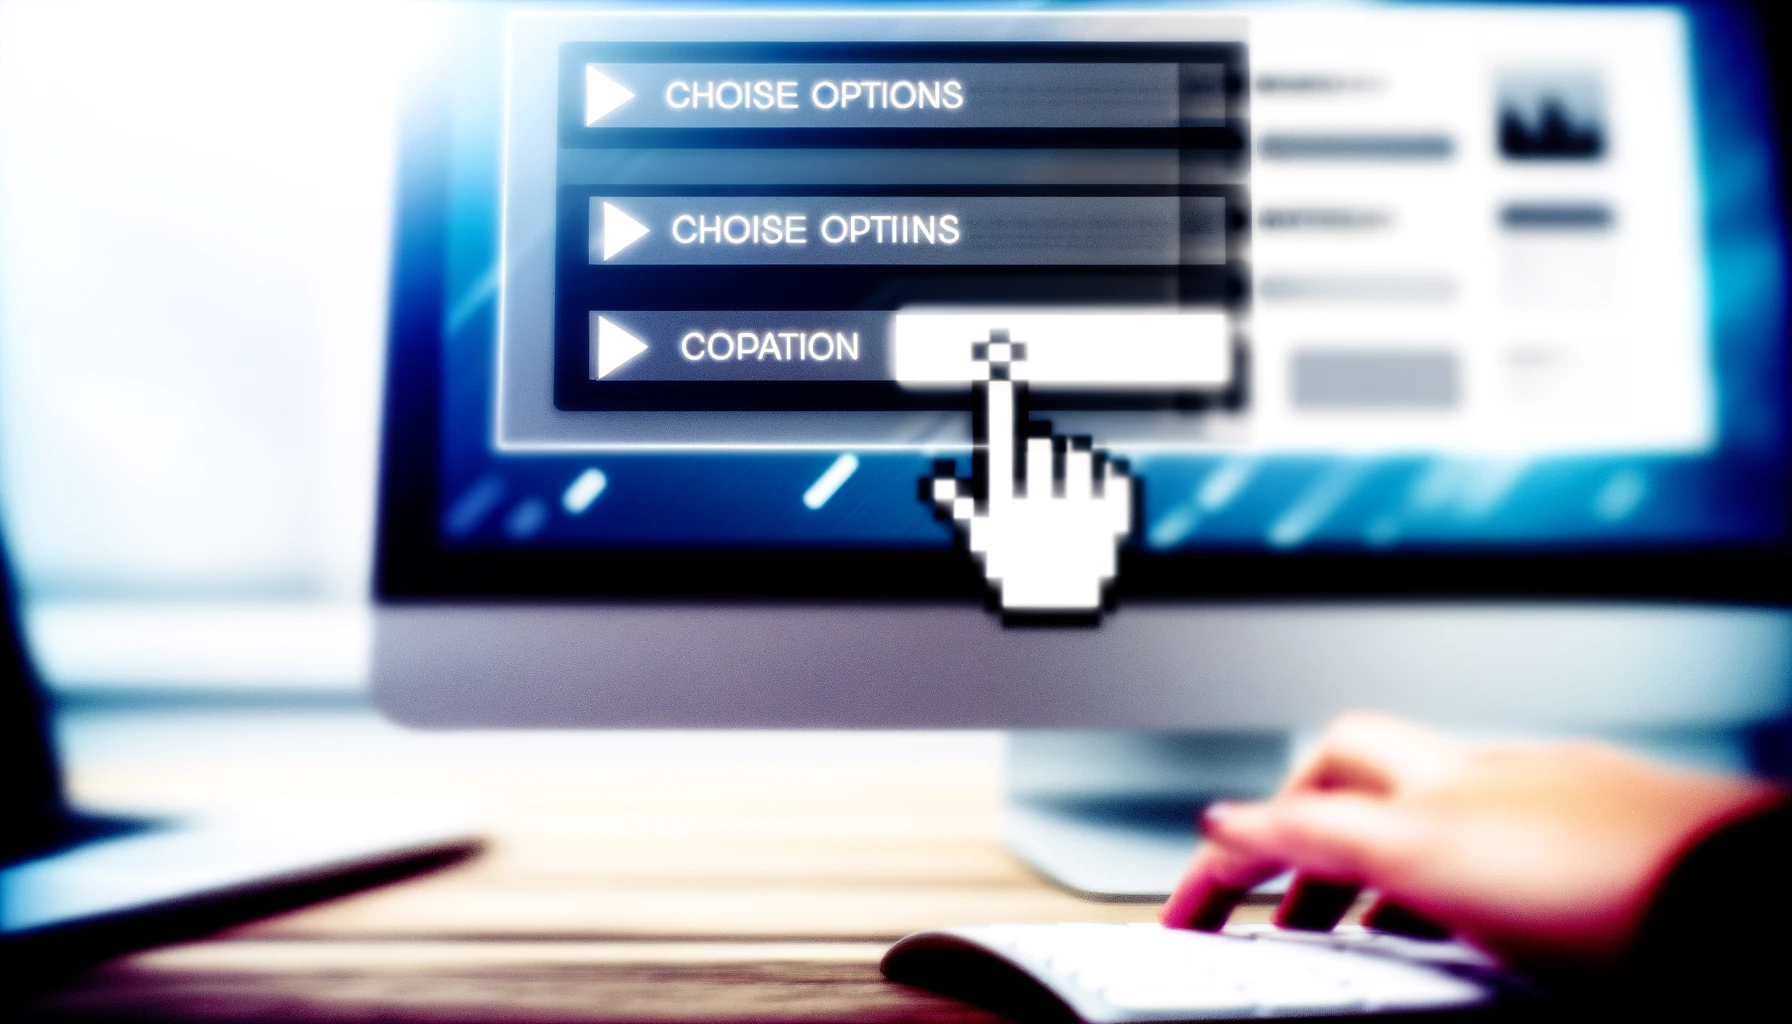 The images depict the concept of choosing options on a computer screen, featuring a close-up view of a monitor displaying a graphical user interface with several options, emphasizing the ease and efficiency of digital decision-making and customization.